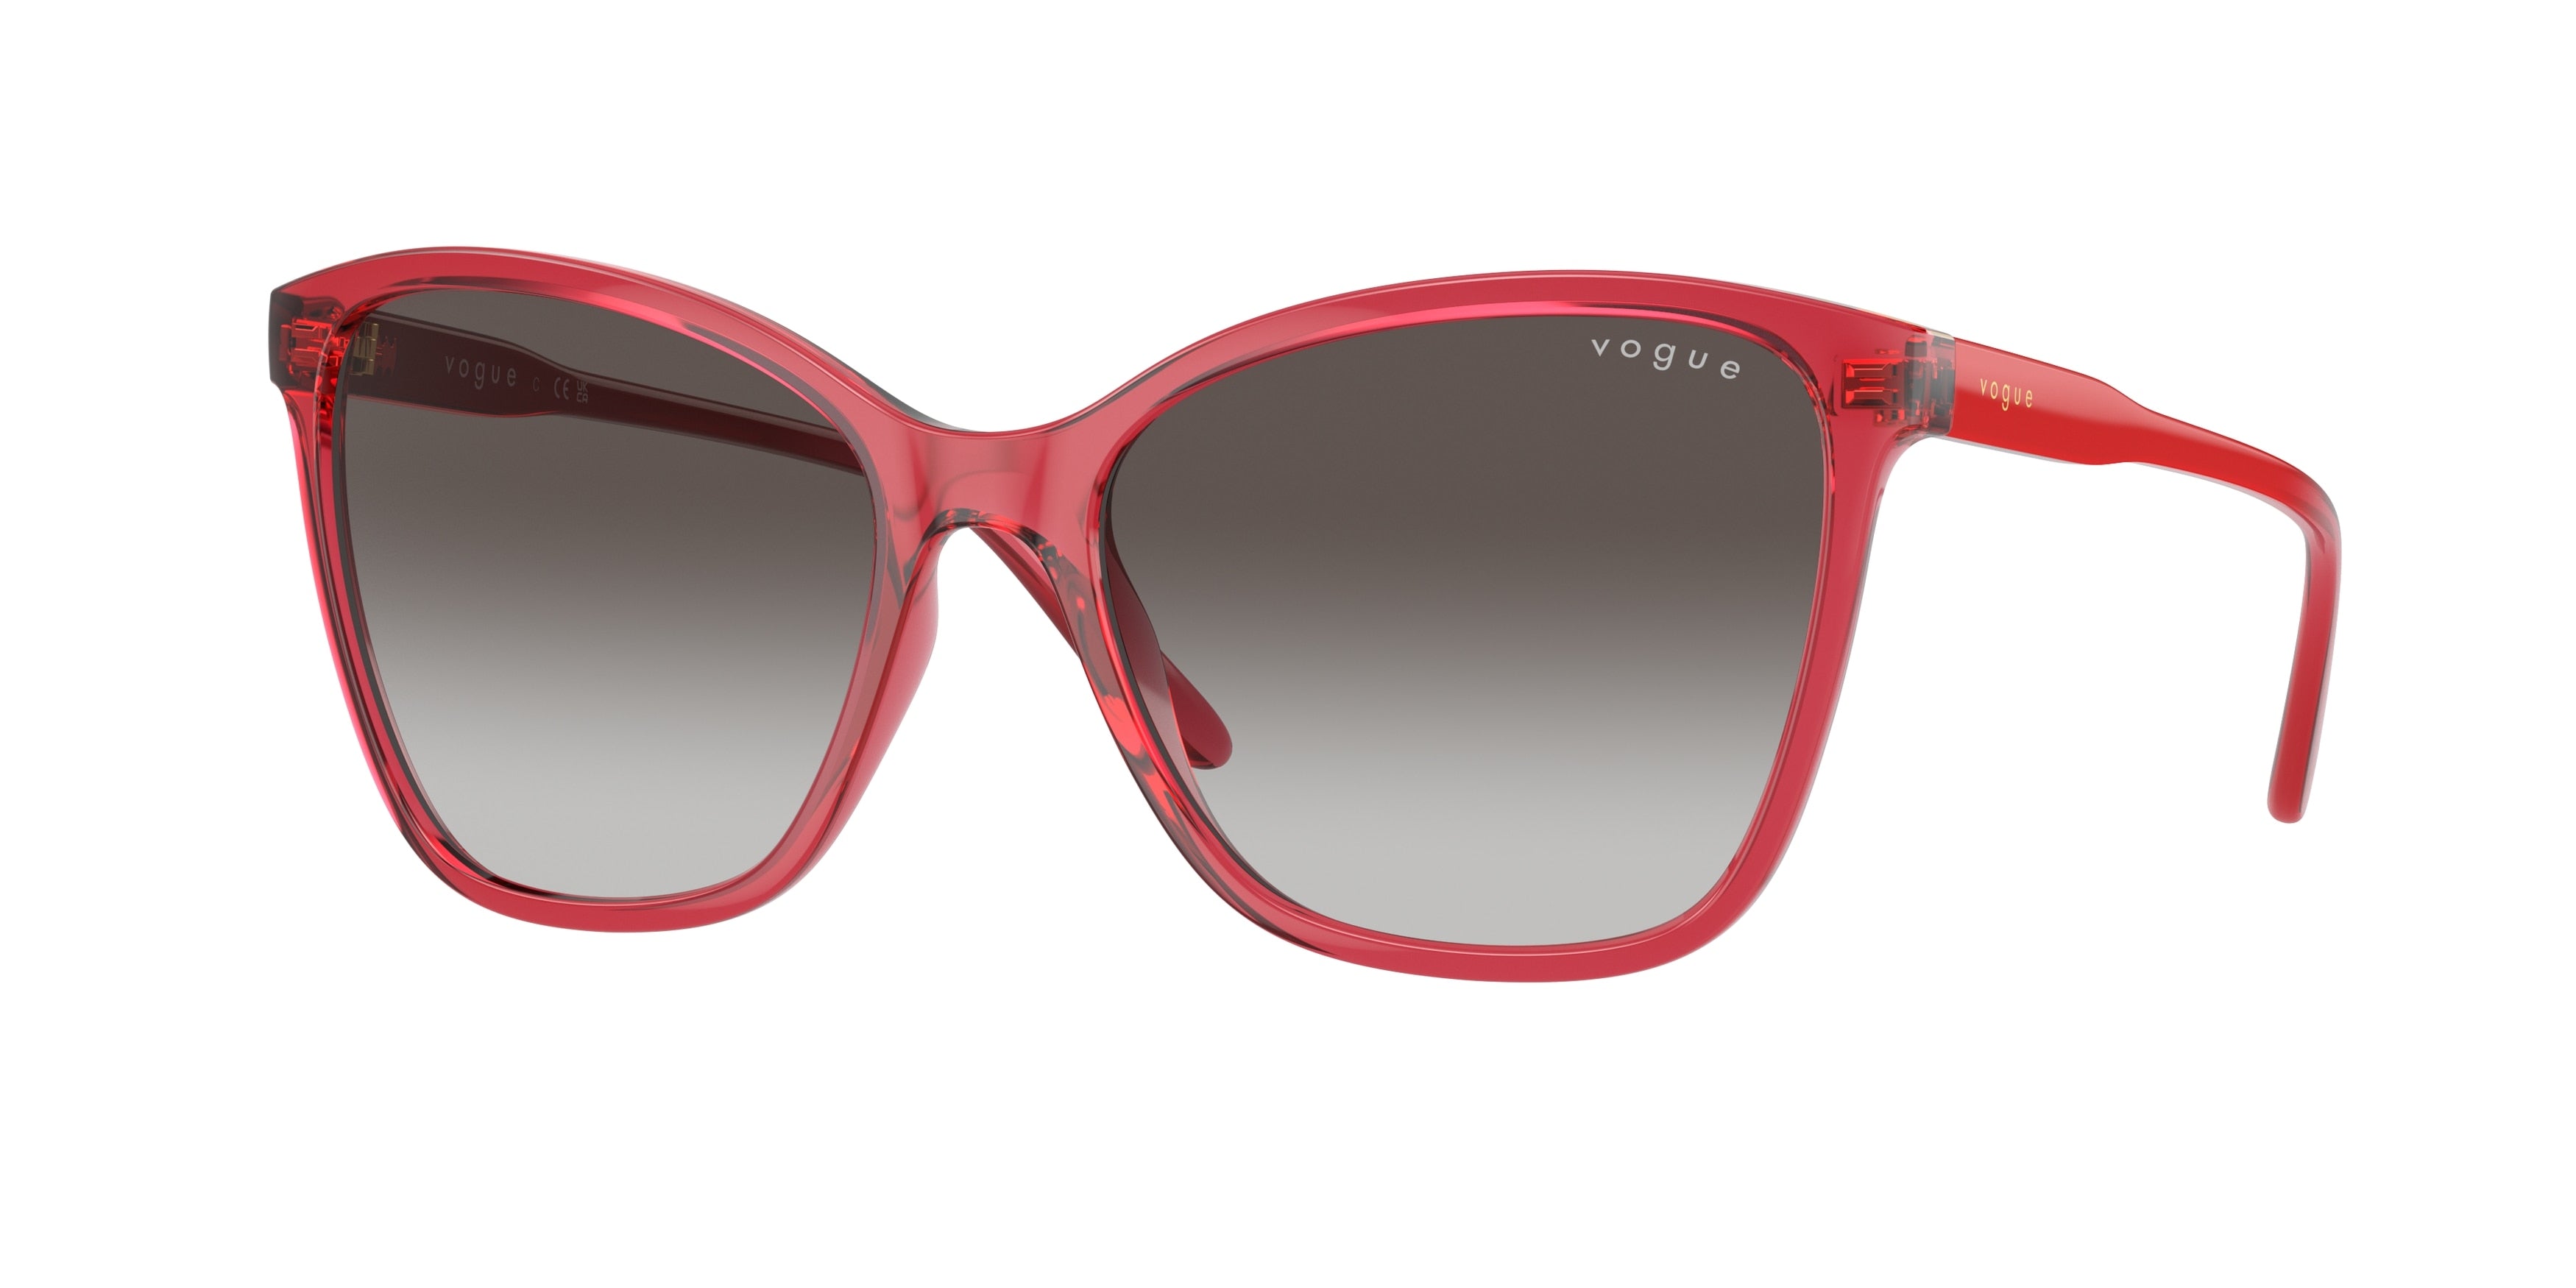 Vogue VO5520SF Butterfly Sunglasses  30848G-Transparent Red 56-140-16 - Color Map Red